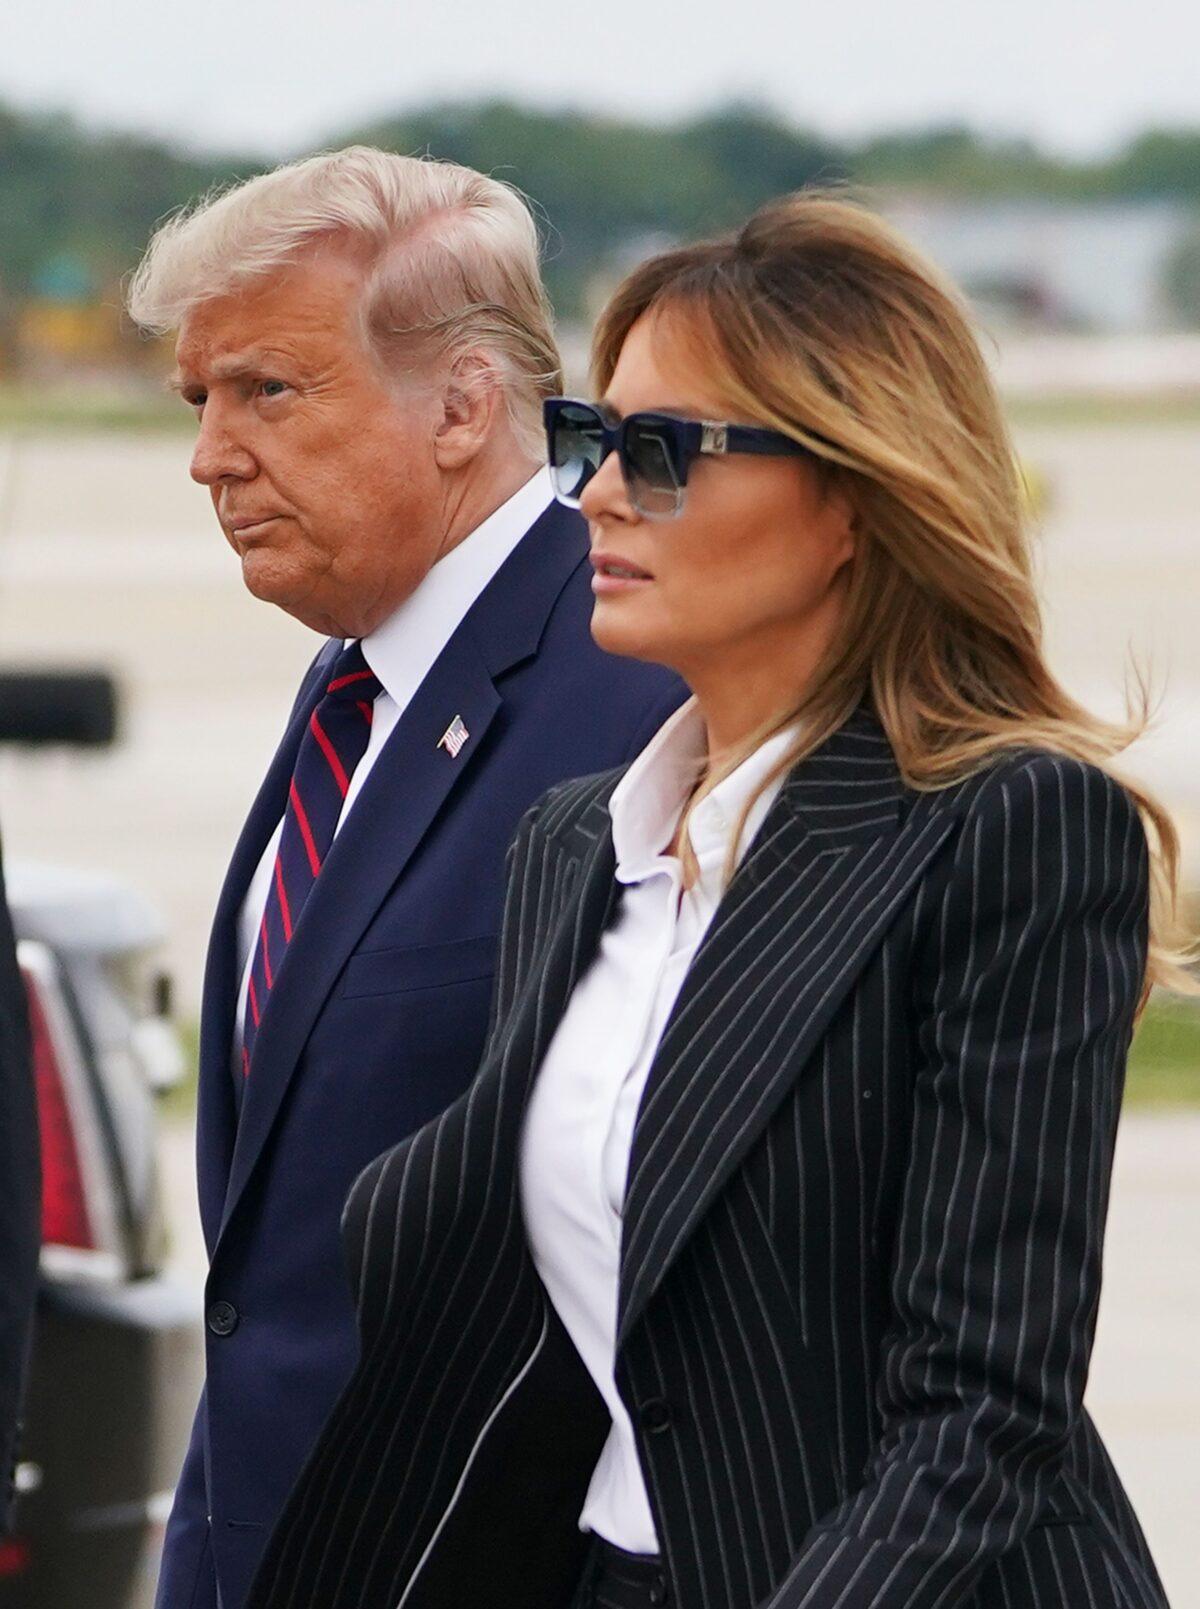 President Donald Trump and First Lady Melania Trump arrive at Cleveland Hopkins International Airport in Cleveland, Ohio, on Sept. 29, 2020. (Mandel Ngan/AFP via Getty Images)